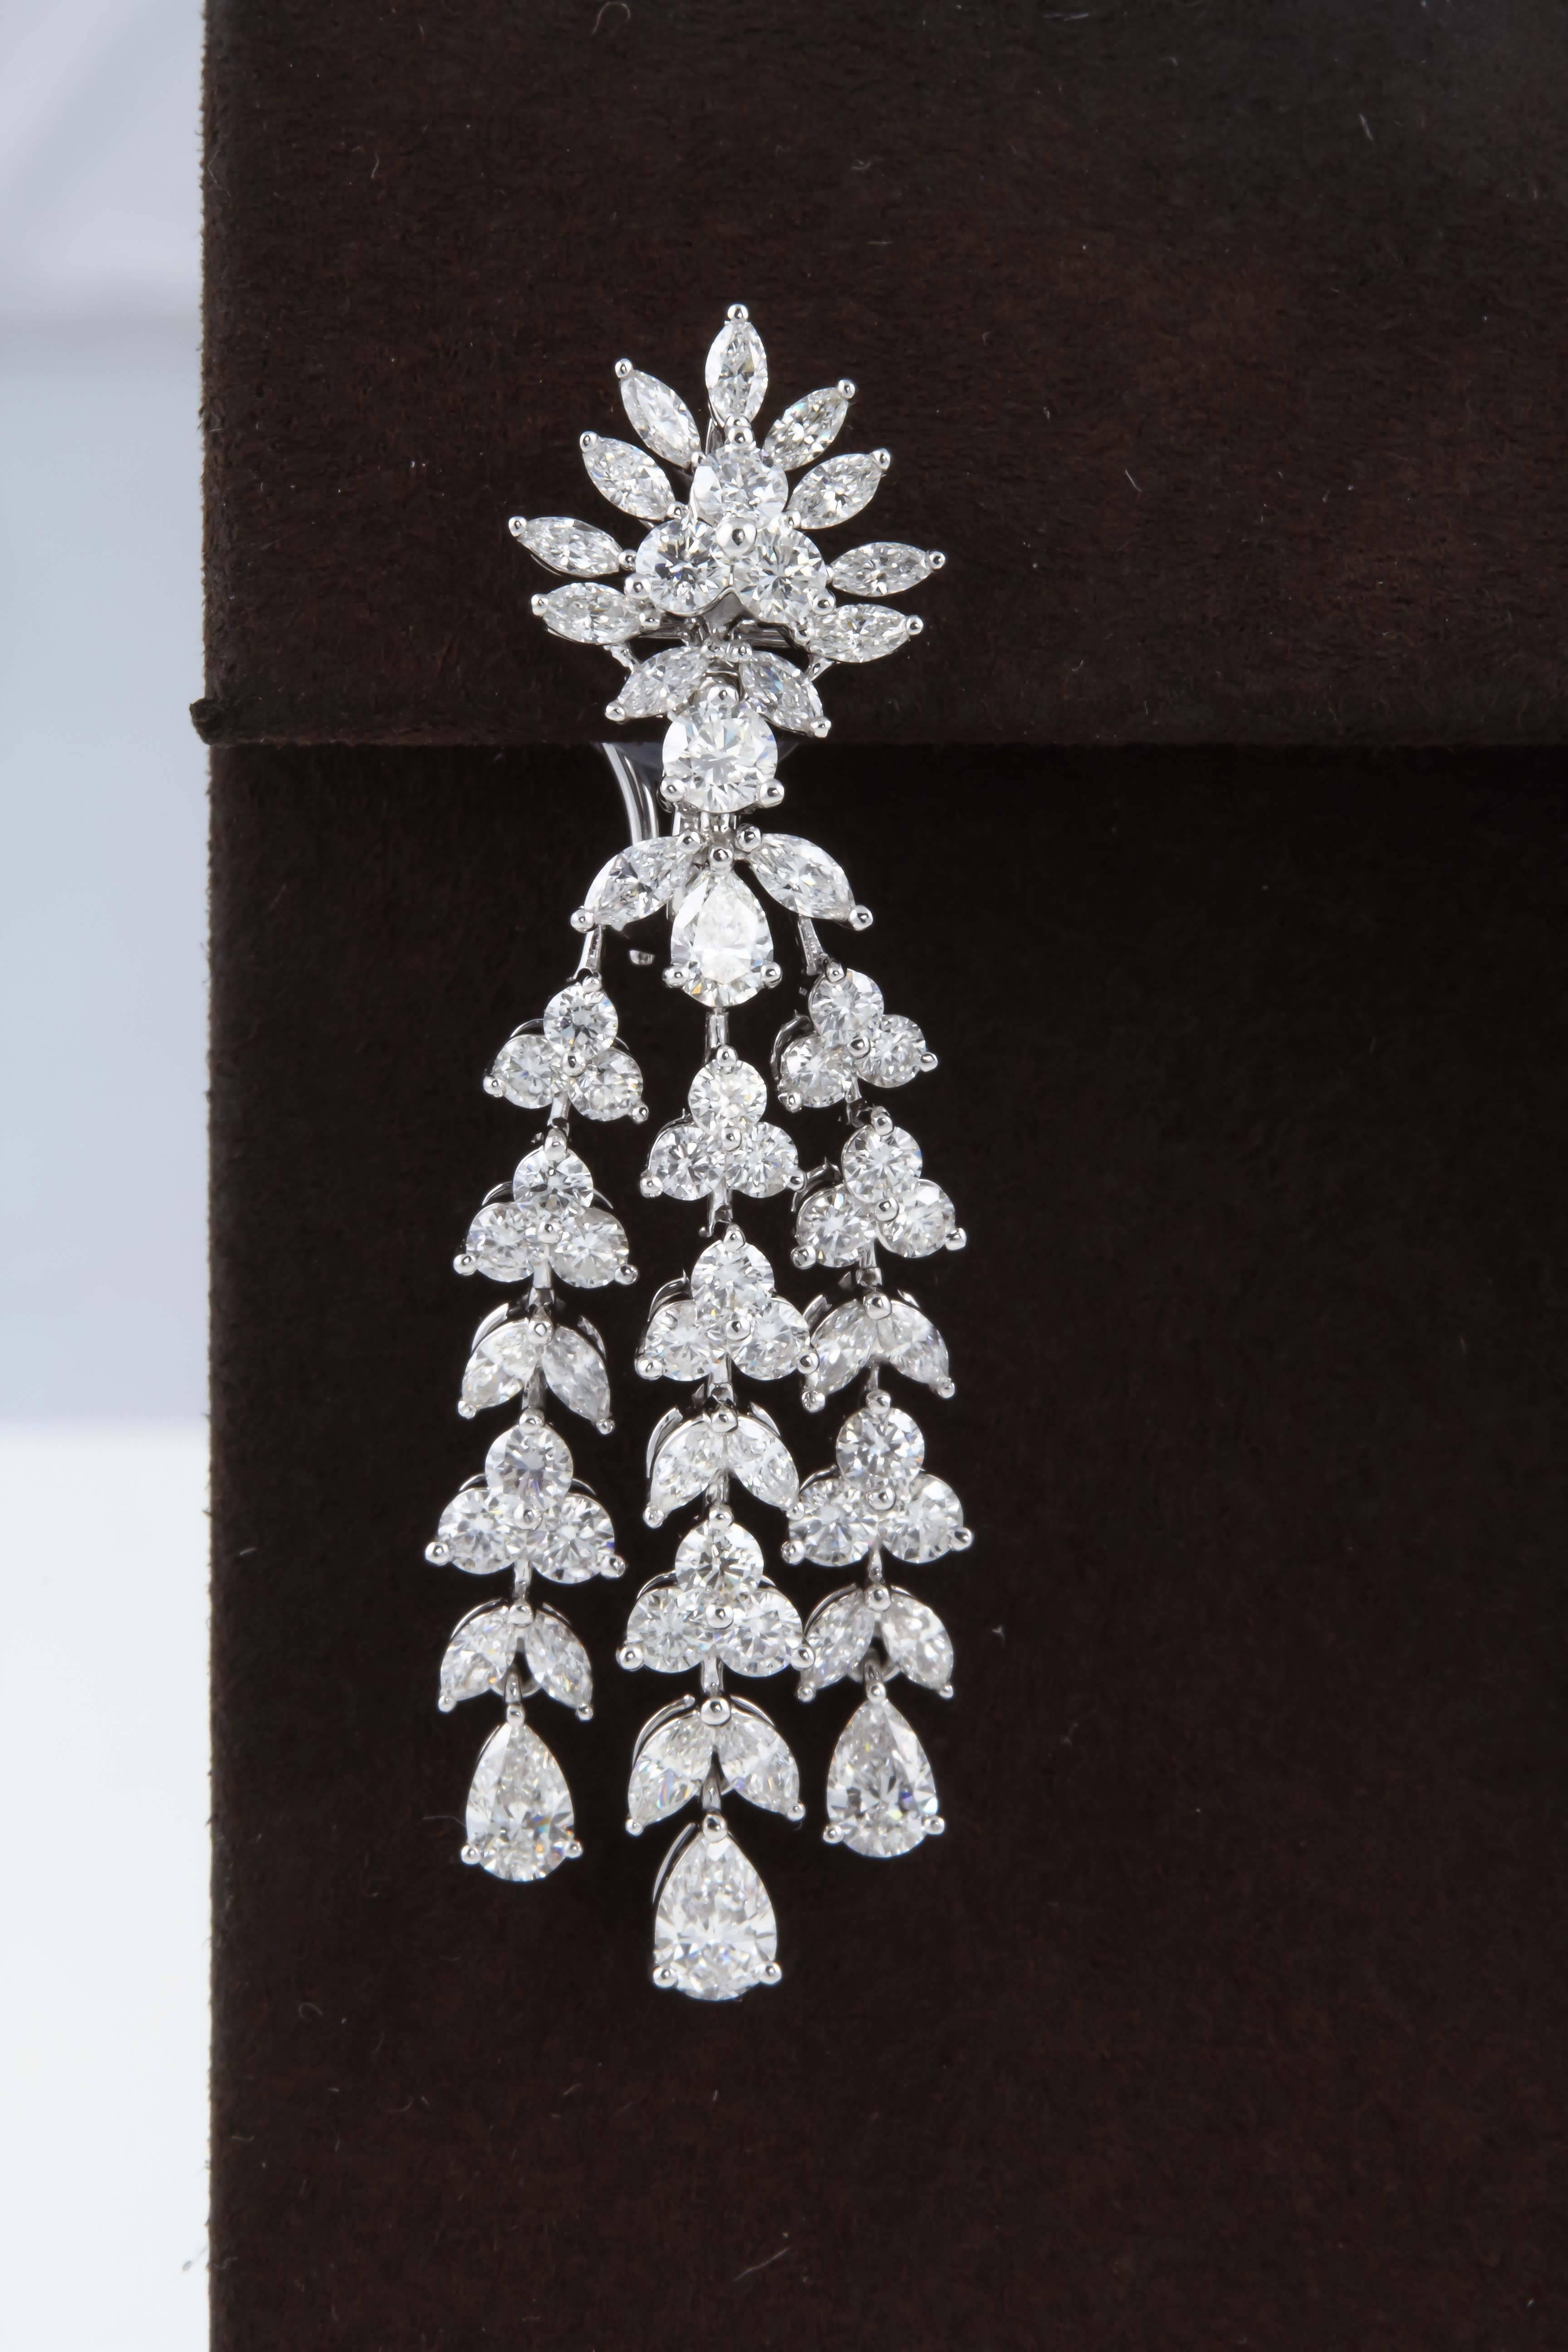 

A classic design with incredible movement and sparkle!

8.20 carats of G VS diamonds set in 18k white gold. 

Approximately 2 inches long

A fabulous earring with a grand look at a great price point. 

